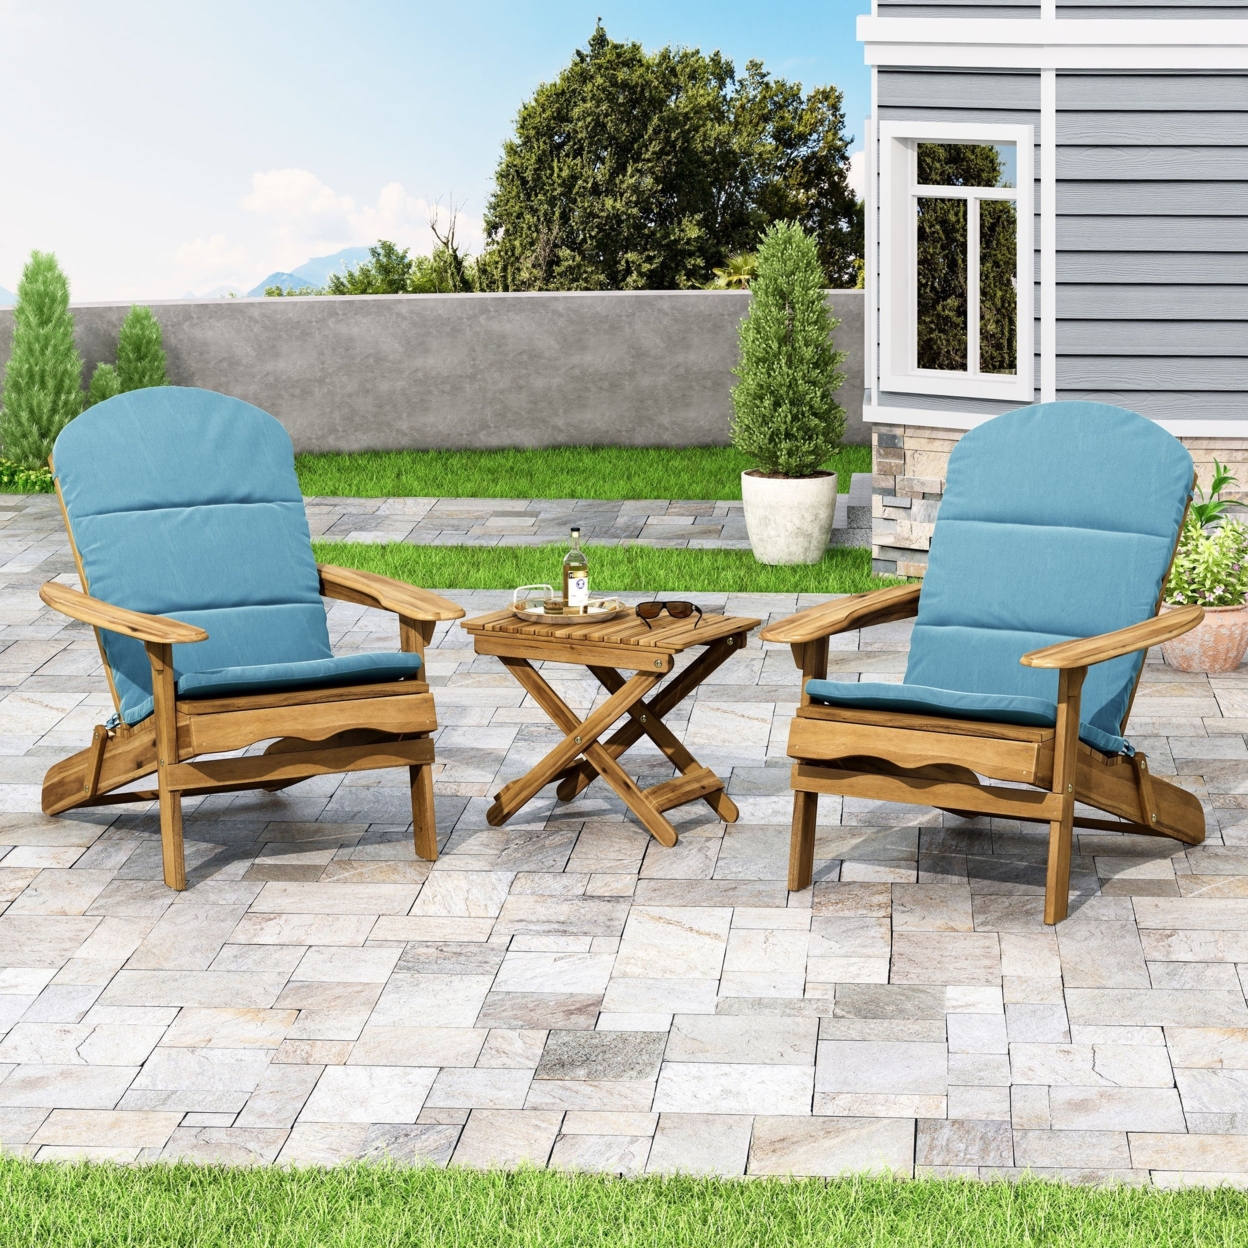 Reed Outdoor 2 Seater Acacia Wood Chat Set With Water Resistant Cushions - Gray/dark Teal